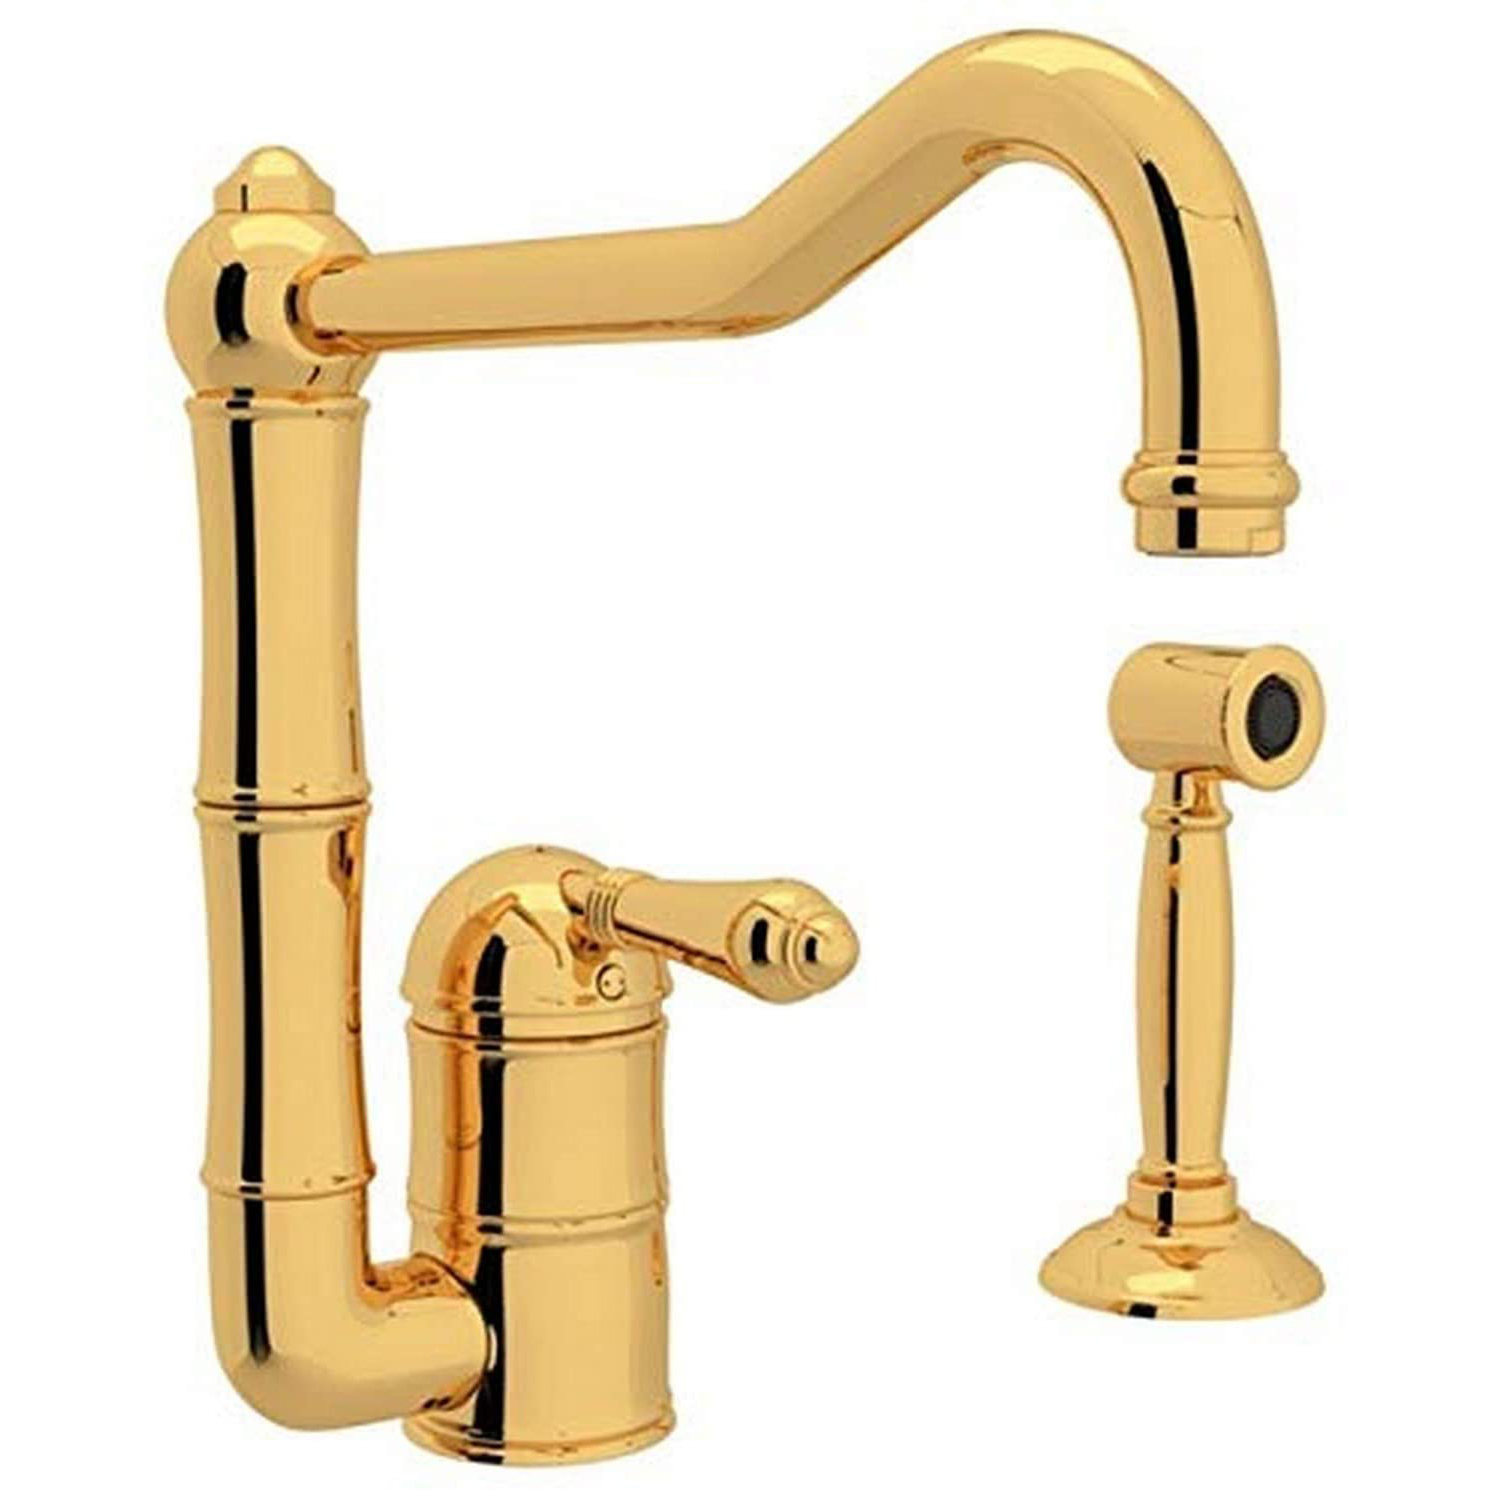 Italian Country Kitchen Faucet in Inca Brass w/Metal Lever & Spray